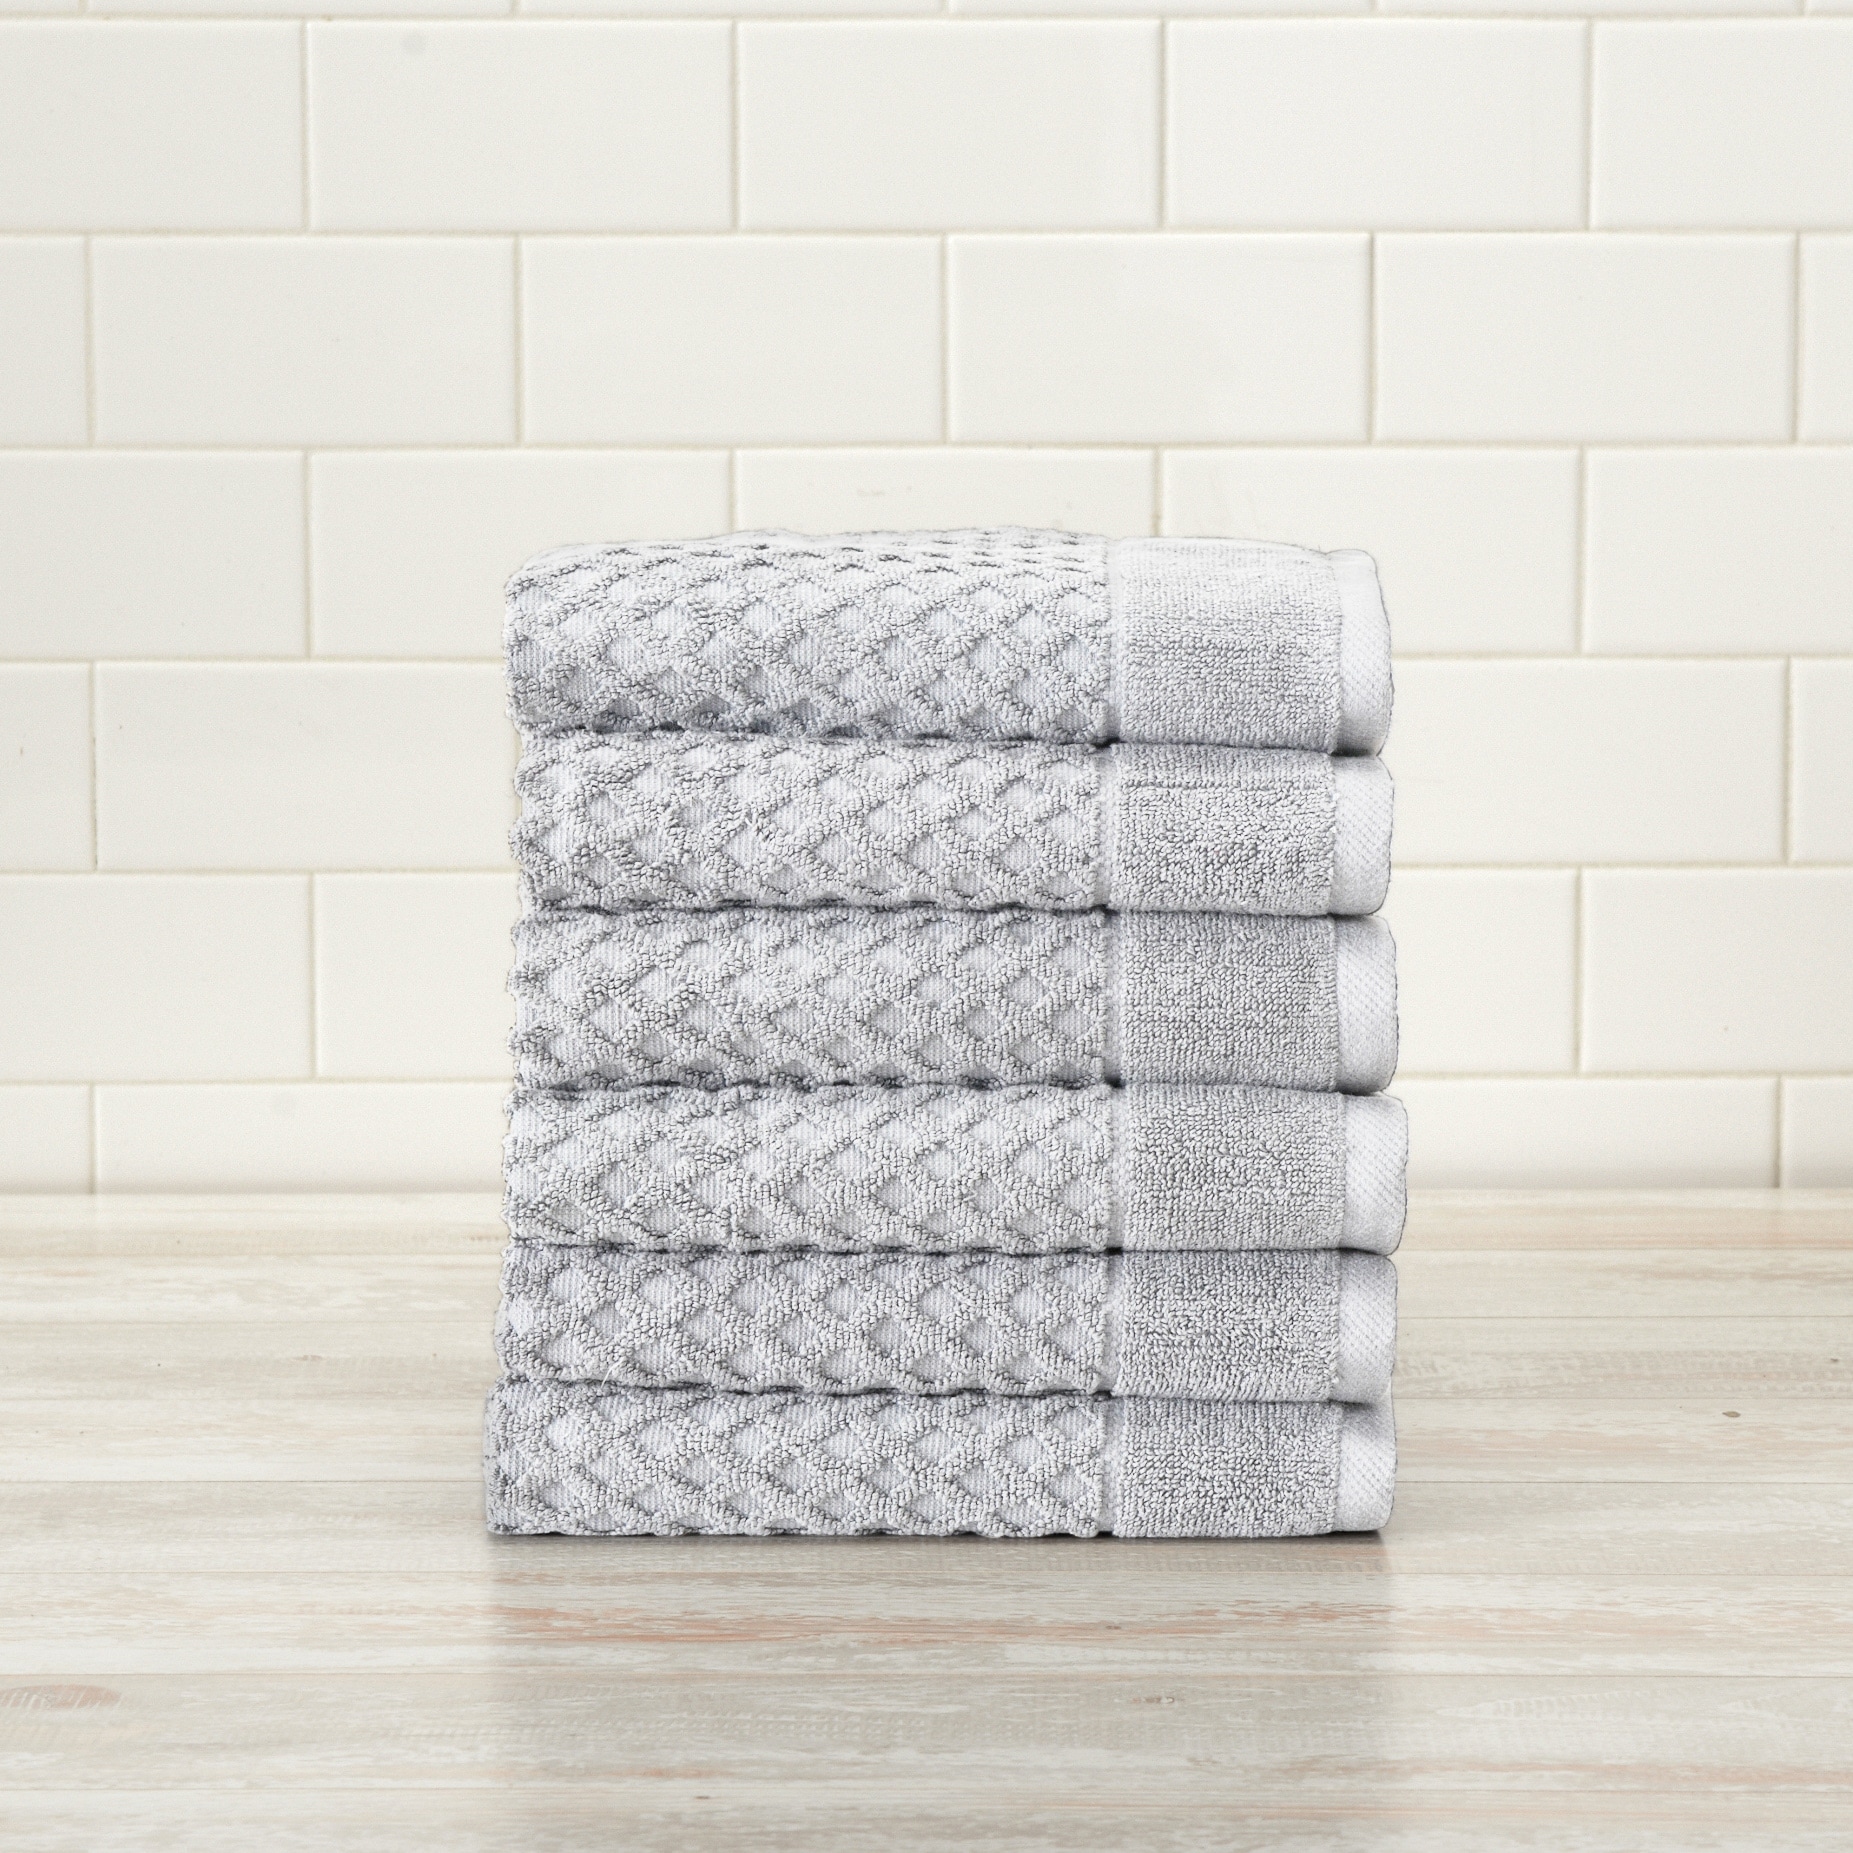 https://ak1.ostkcdn.com/images/products/is/images/direct/19ec85f288d2891998e0c3bad03a2b51cd0ae99c/Cotton-Textured-Towel-Set-Grayson-Collection.jpg